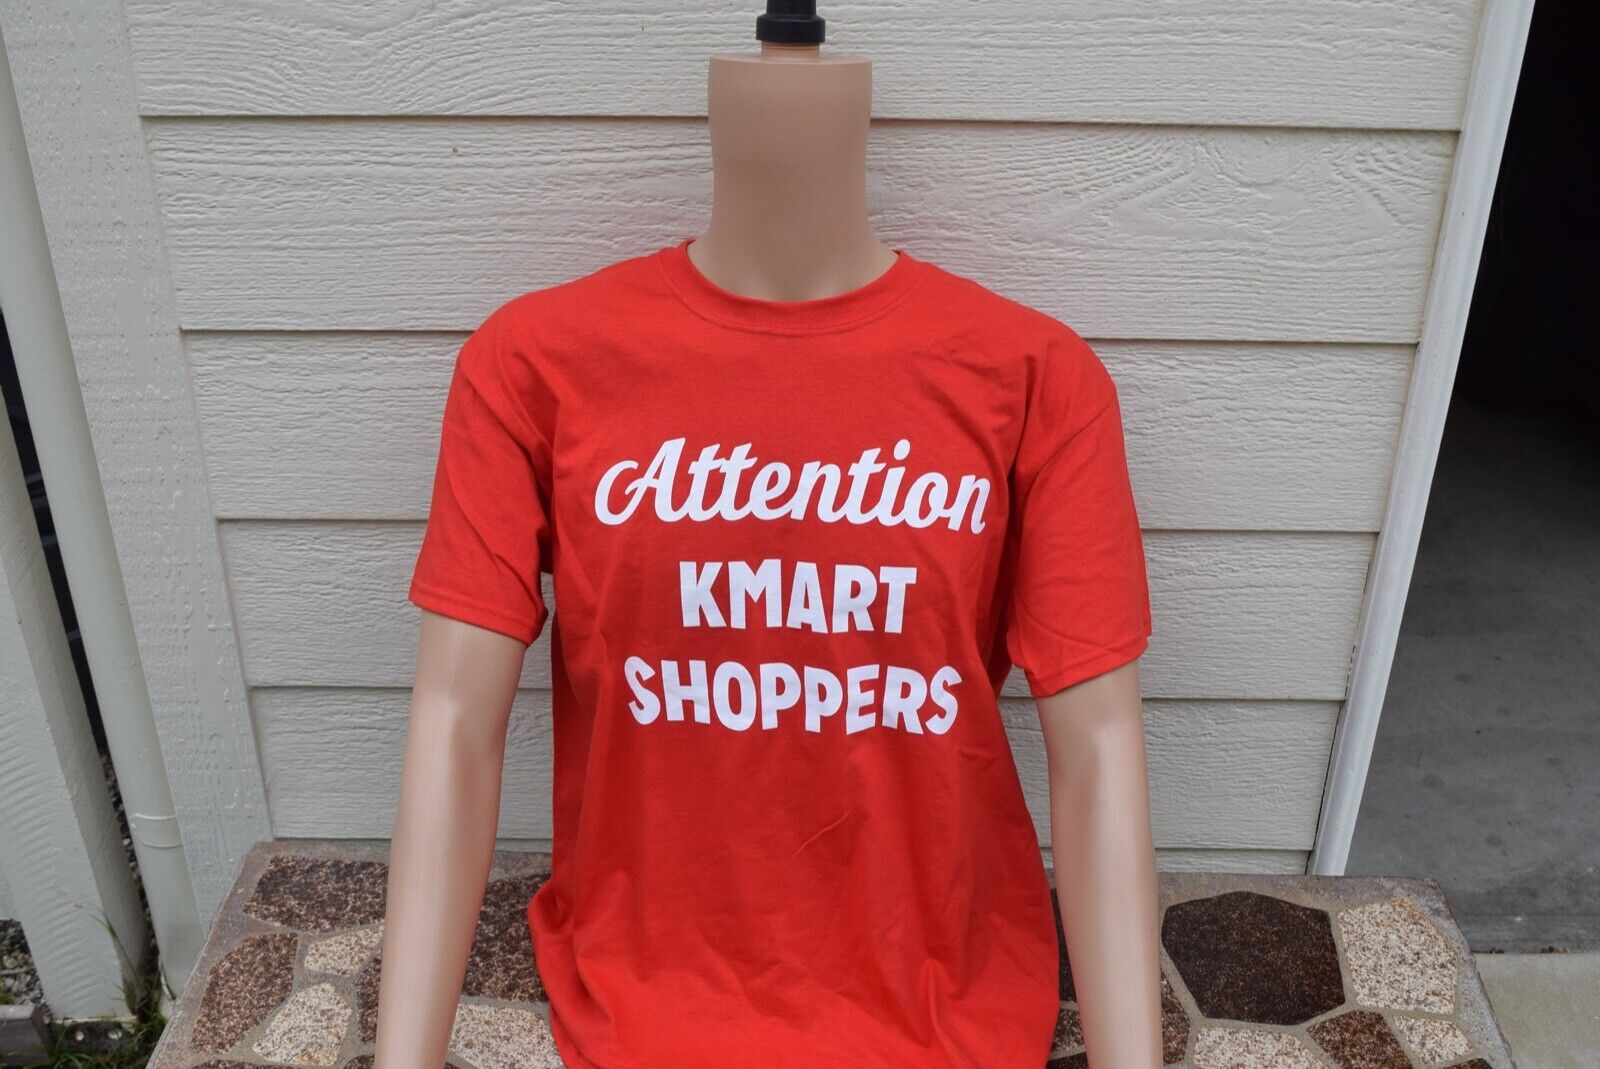 NEW Attention Kmart Shoppers Employee Tee T shirt MED  GILDAN HEAVY COTTON RED